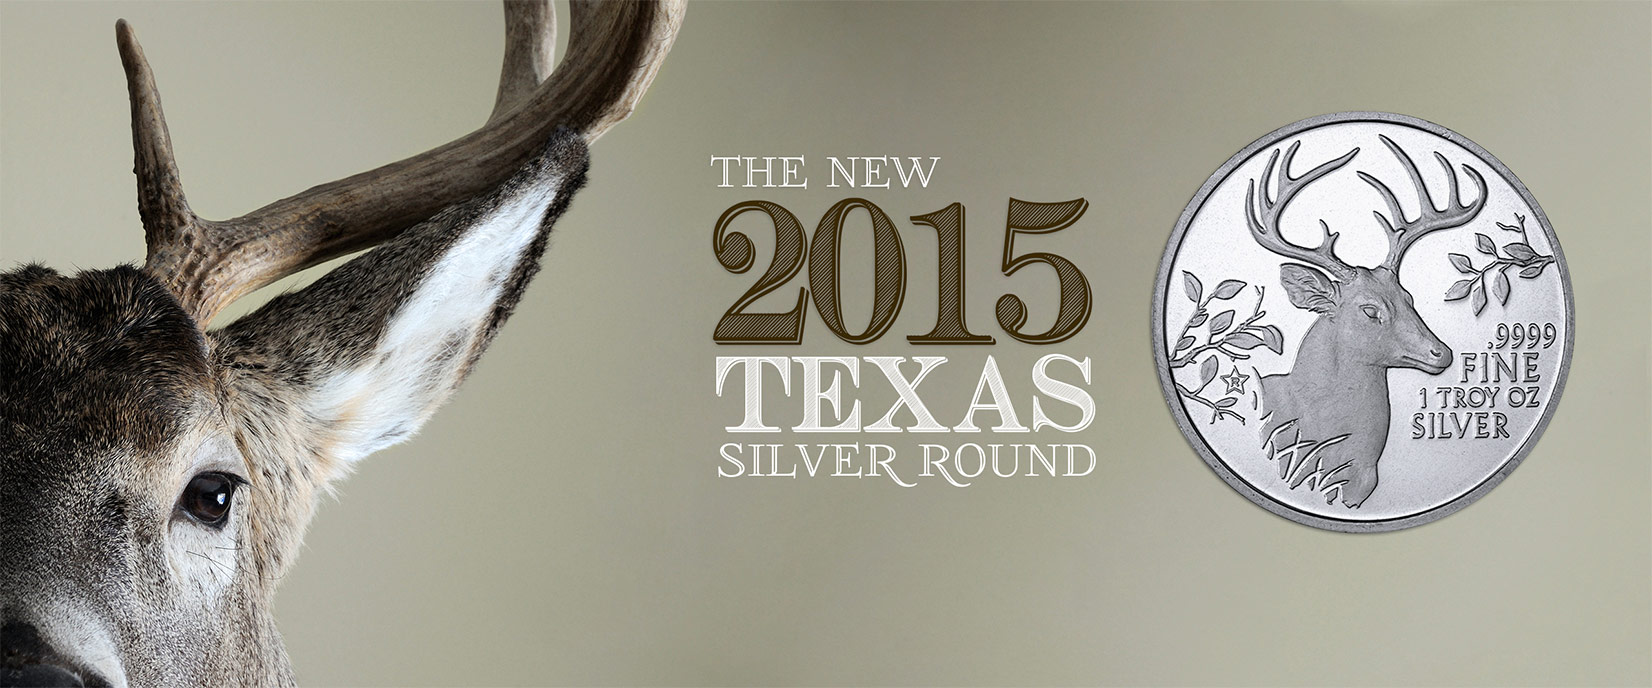 Texas Precious Metals® Announces Release of 2015 Texas “White-Tailed Deer” Silver Round